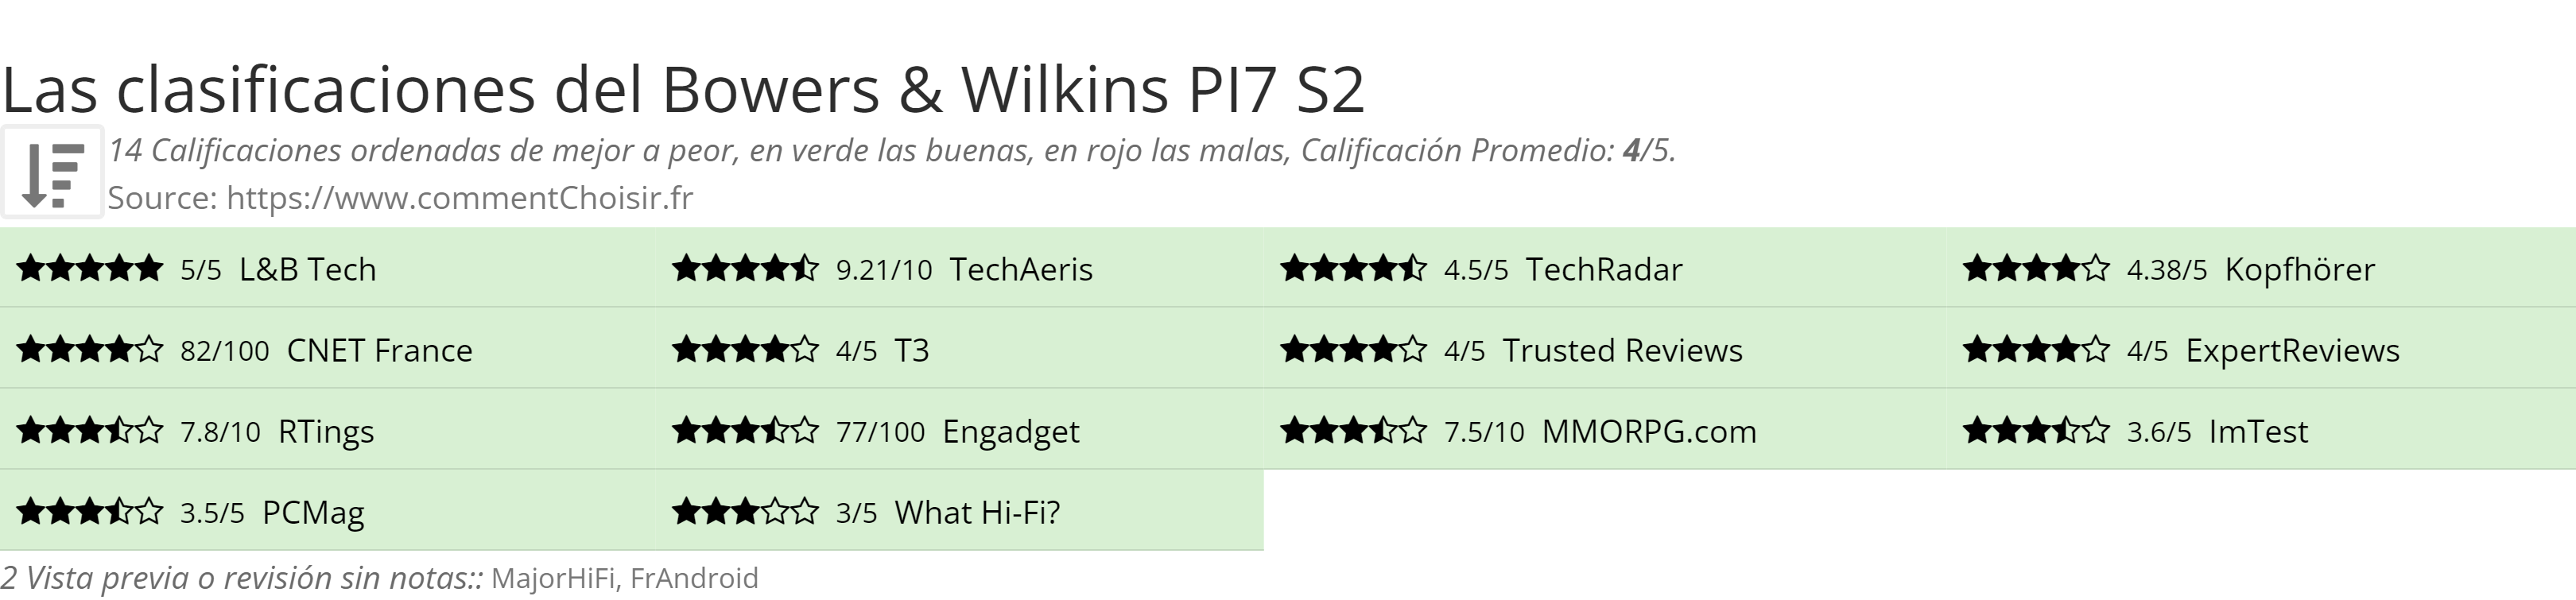 Ratings Bowers & Wilkins PI7 S2